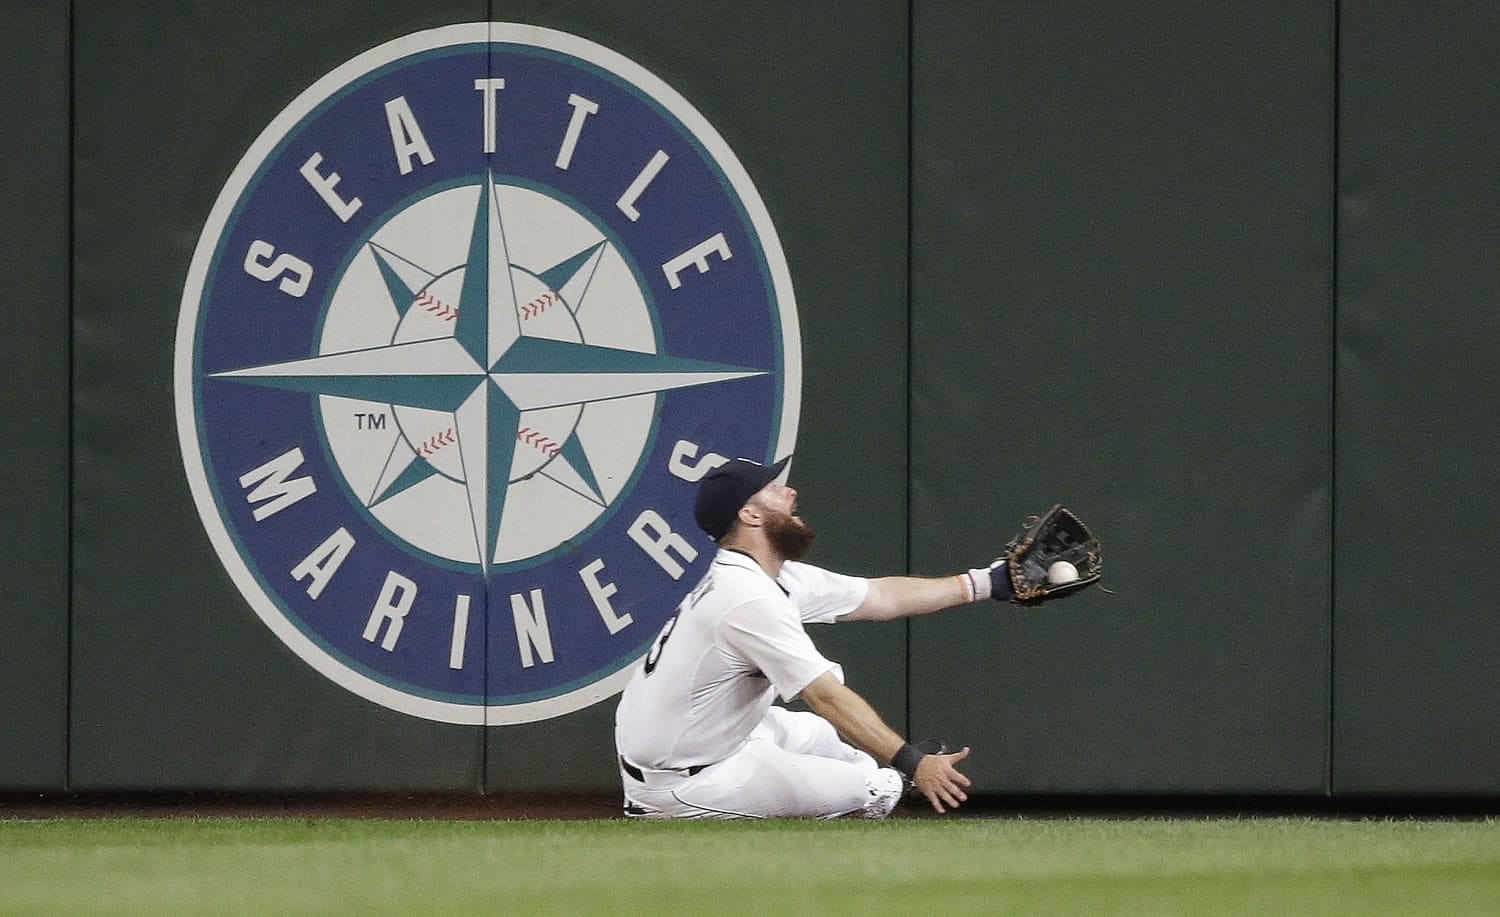 Seattle center fielder Dustin Ackley slides to make a catch of a deep fly ball from San Diego's Will Middlebrooks during the sixth inning.